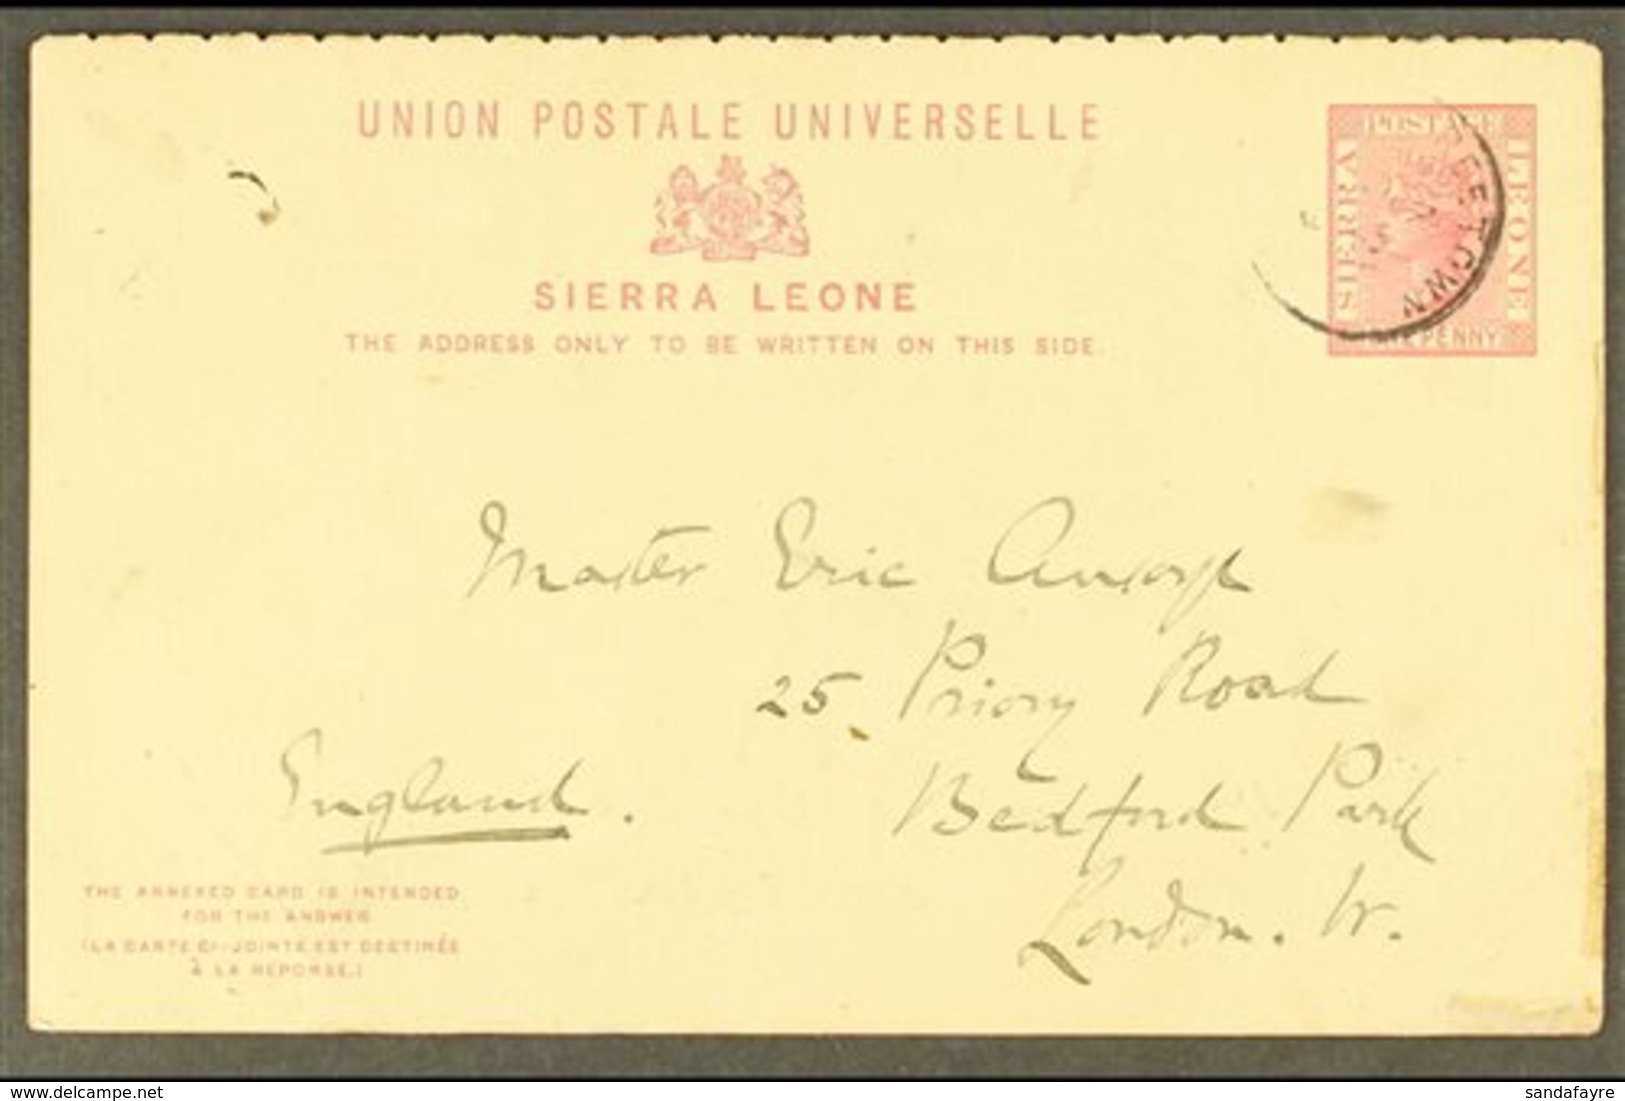 1899 (Oct) 1d Reply Card Top Portion Headed "On Board The Batanga", Posted Freetown To London. For More Images, Please V - Sierra Leone (...-1960)